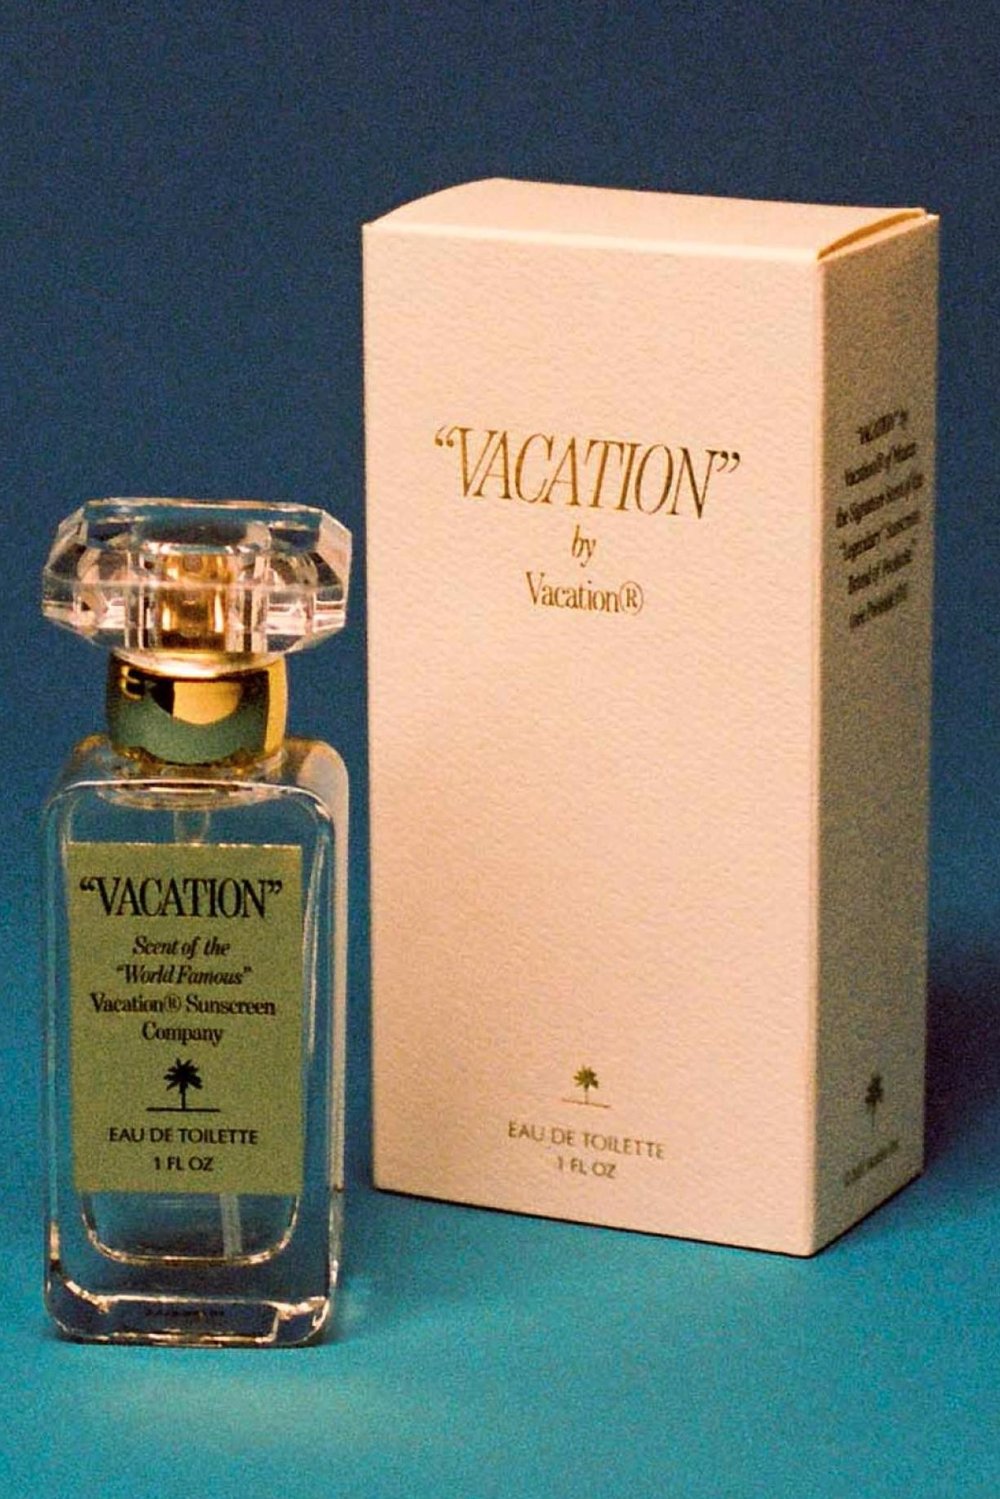 Image of "VACATION" by Vacation®  